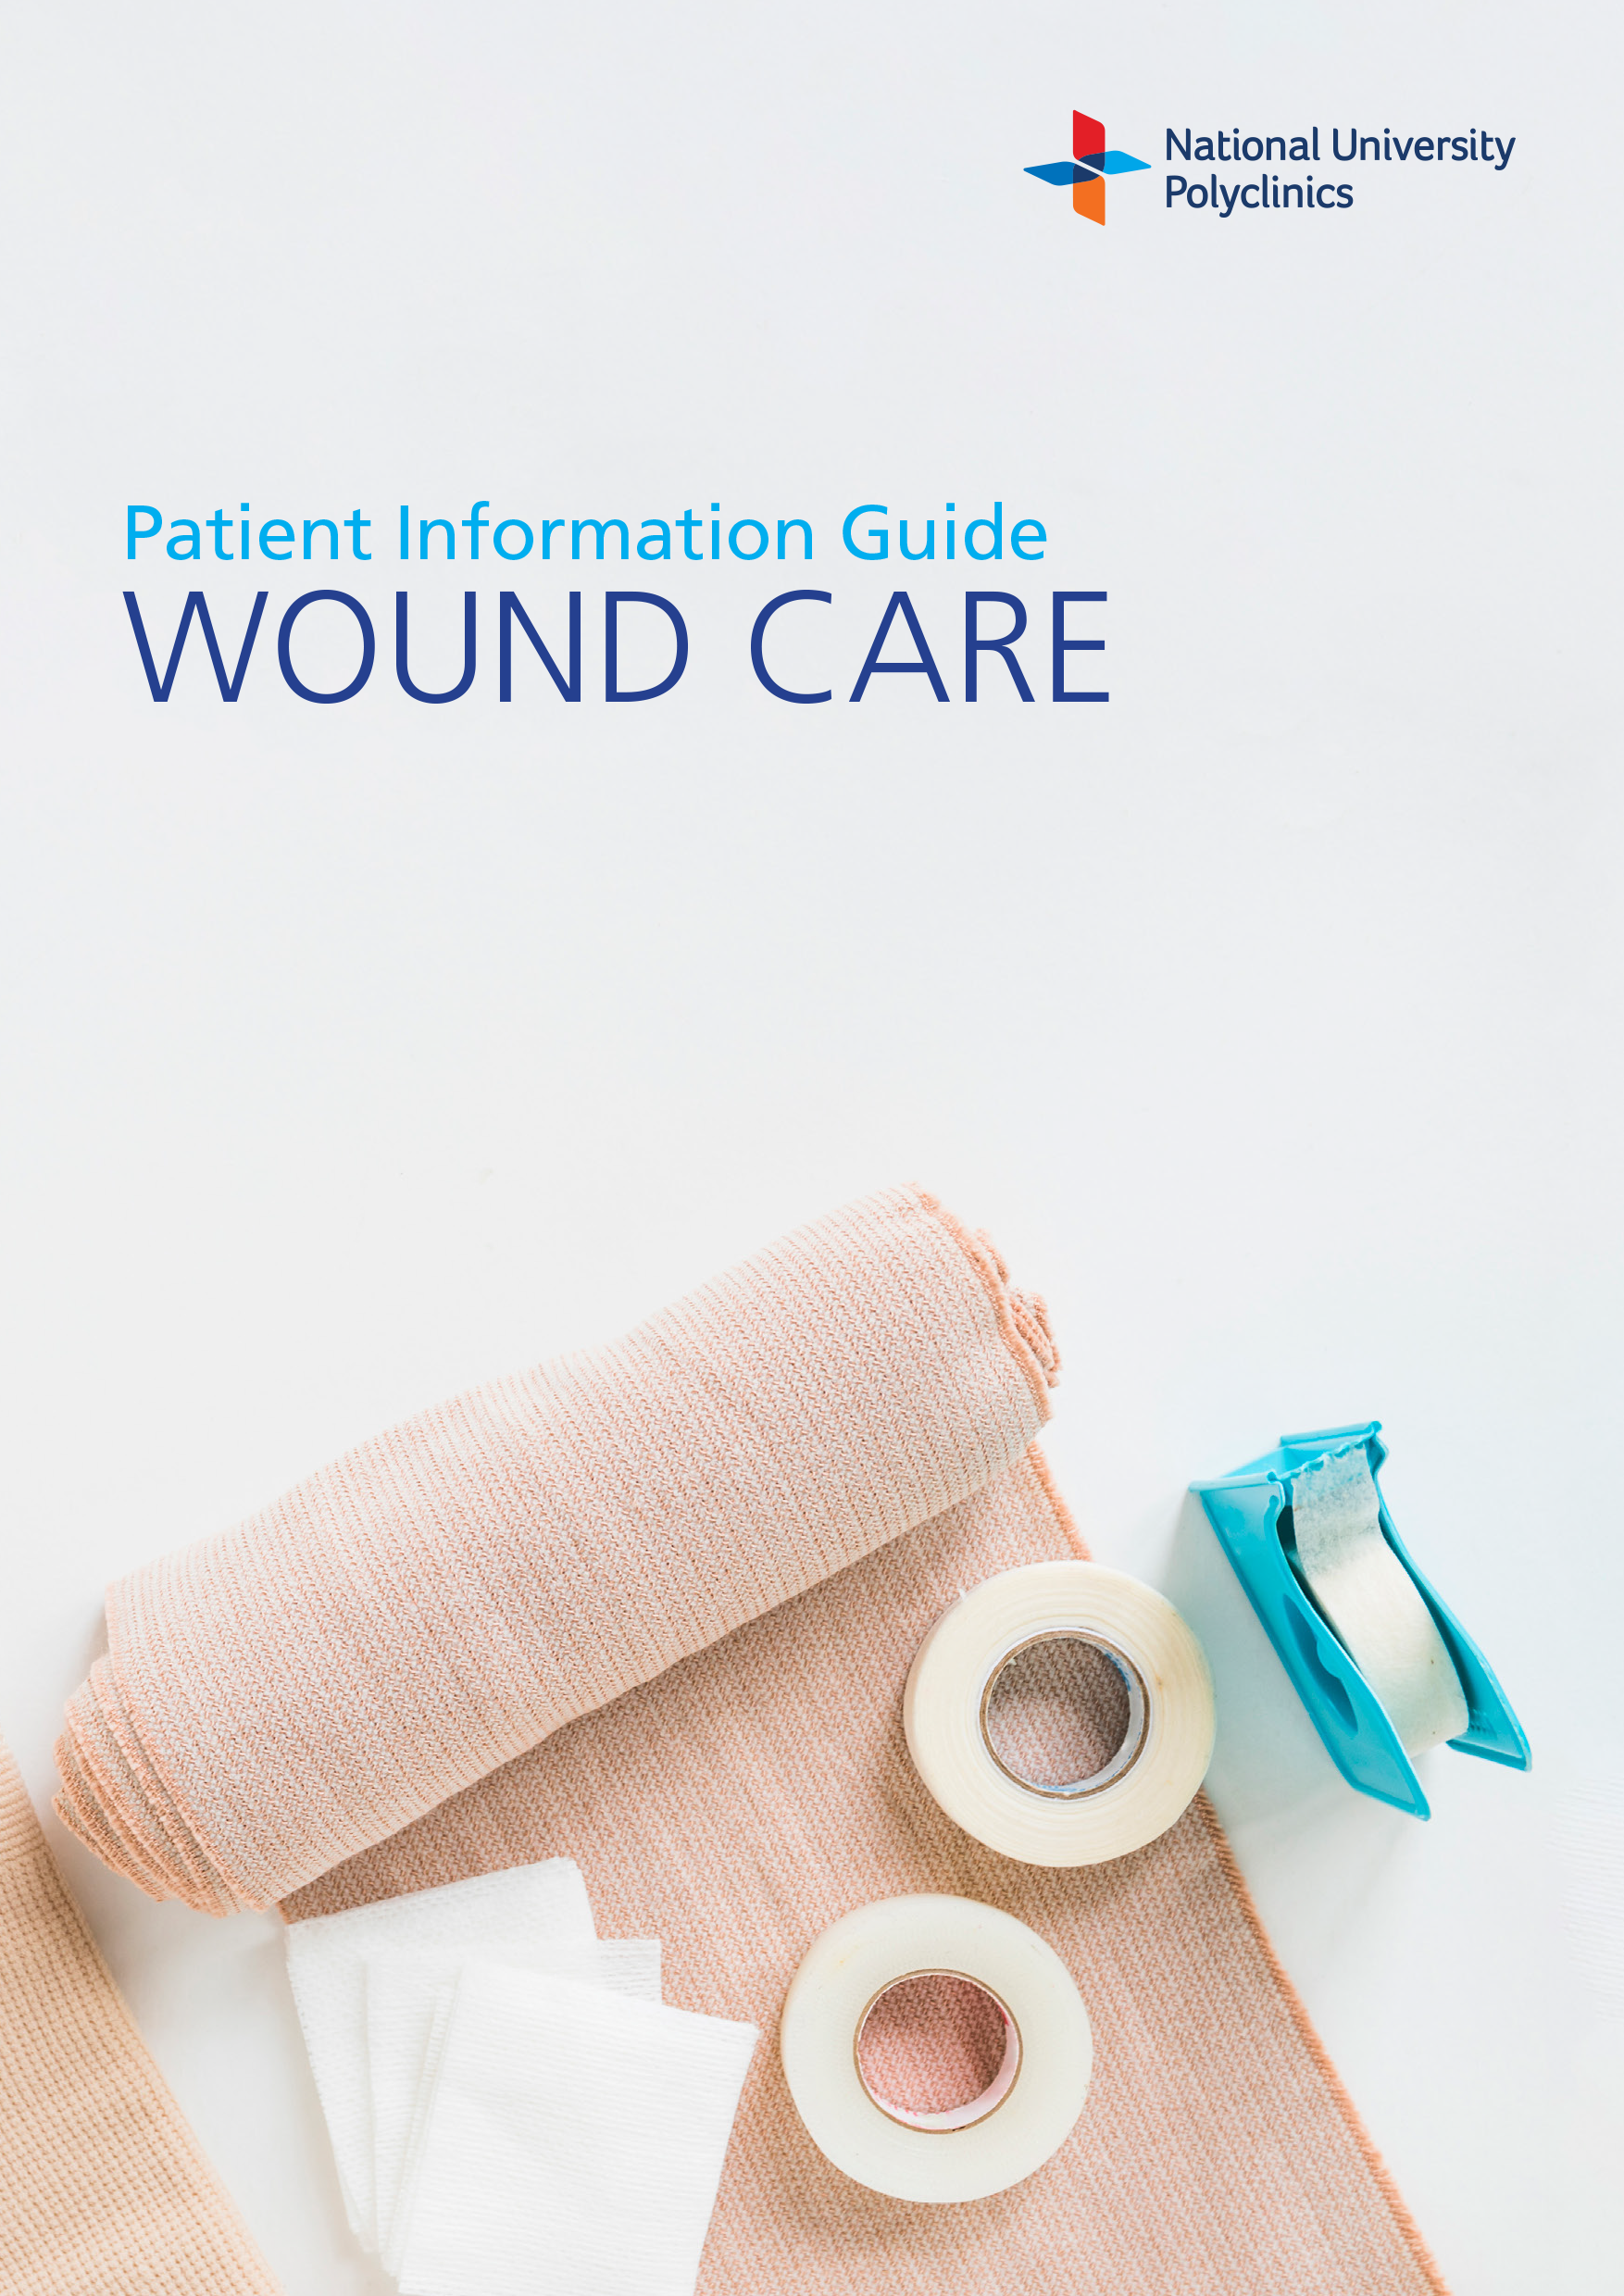 Wound Care (English)